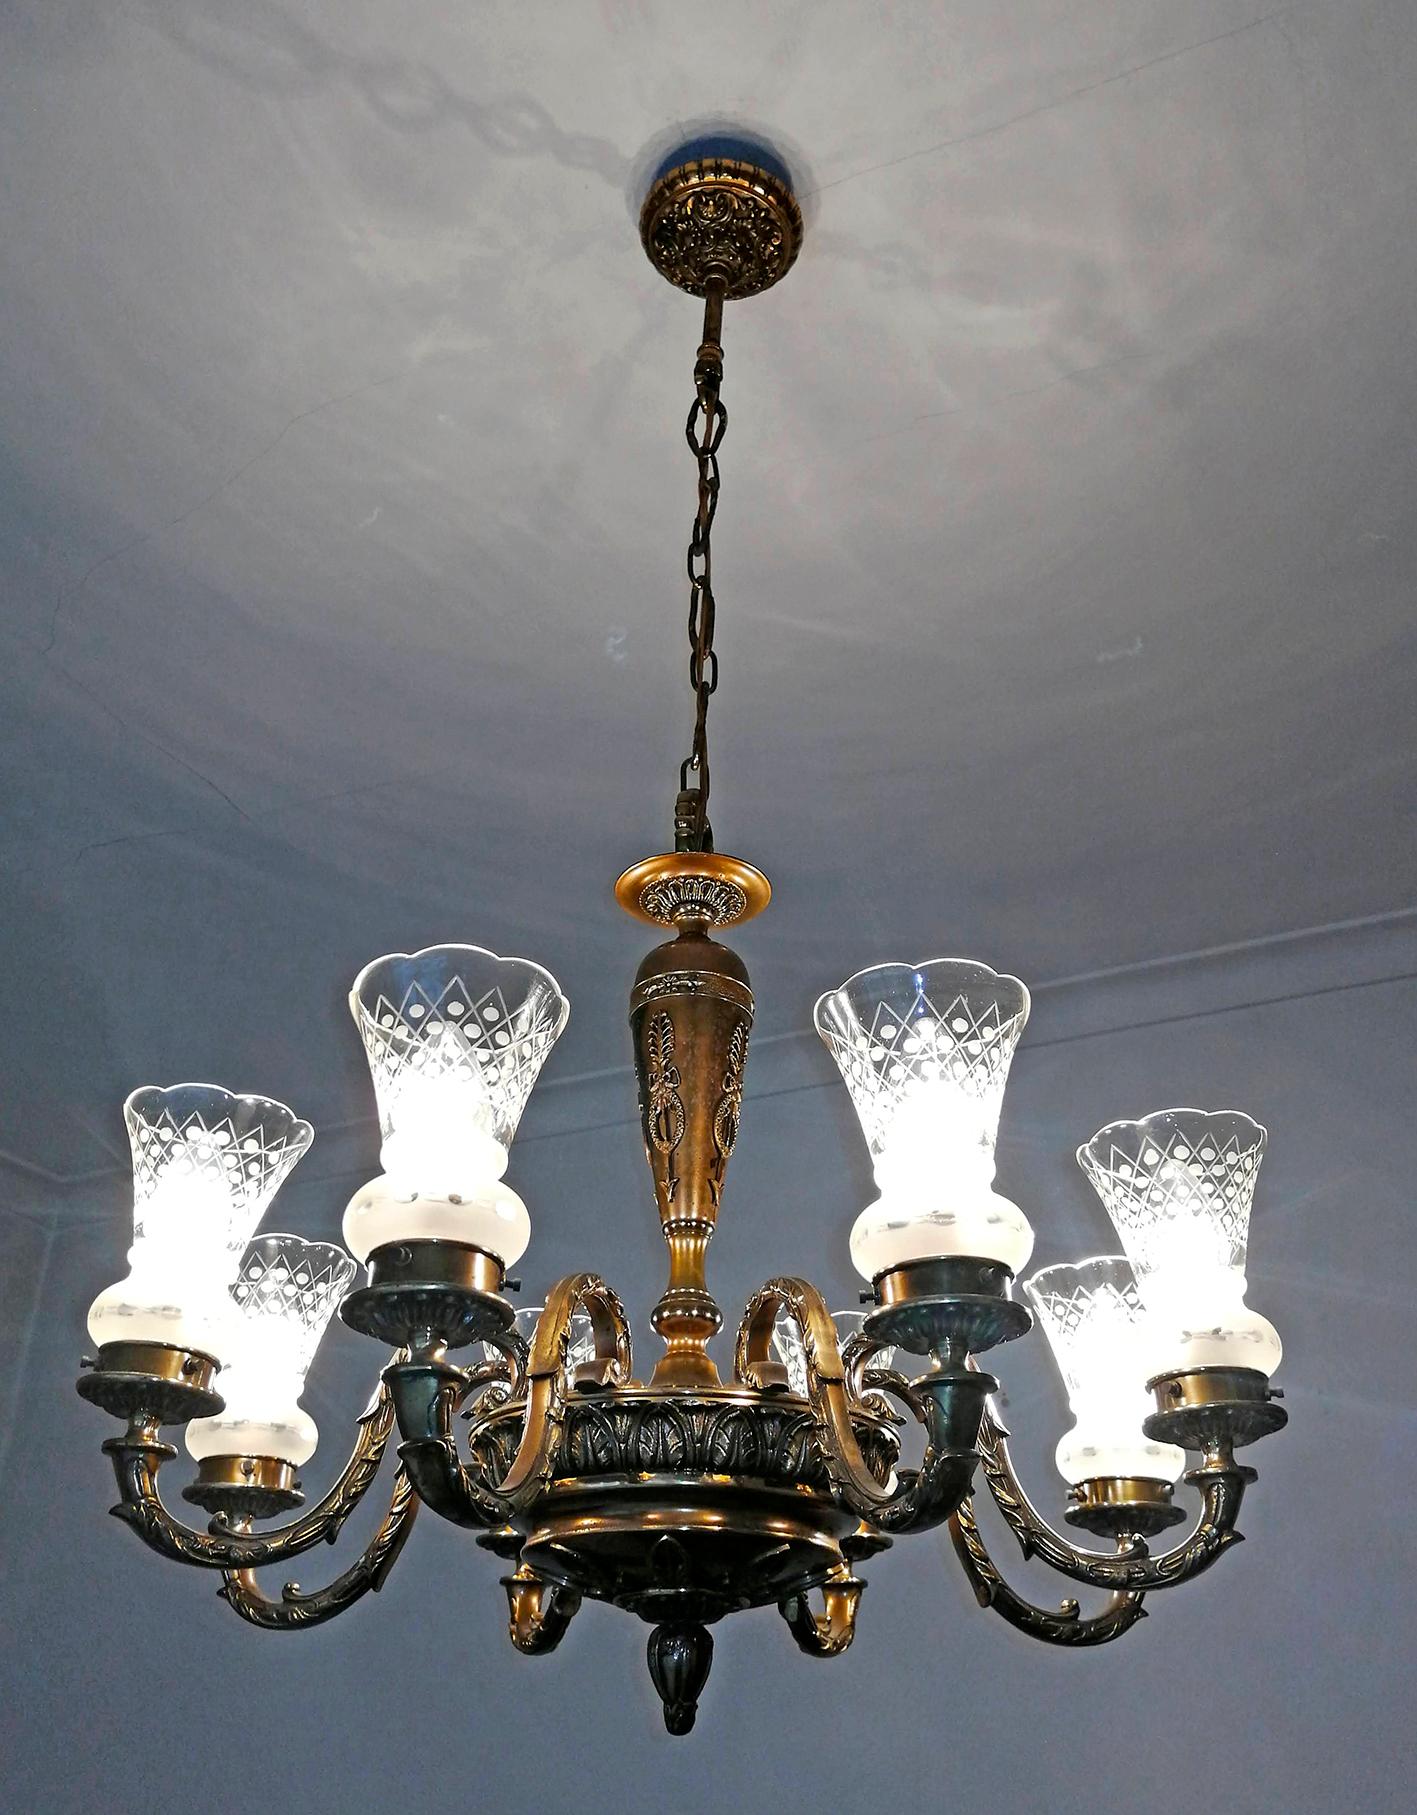 Antique French Empire Neoclassical Gilt Bronze Chandelier, Early 20th Century For Sale 6